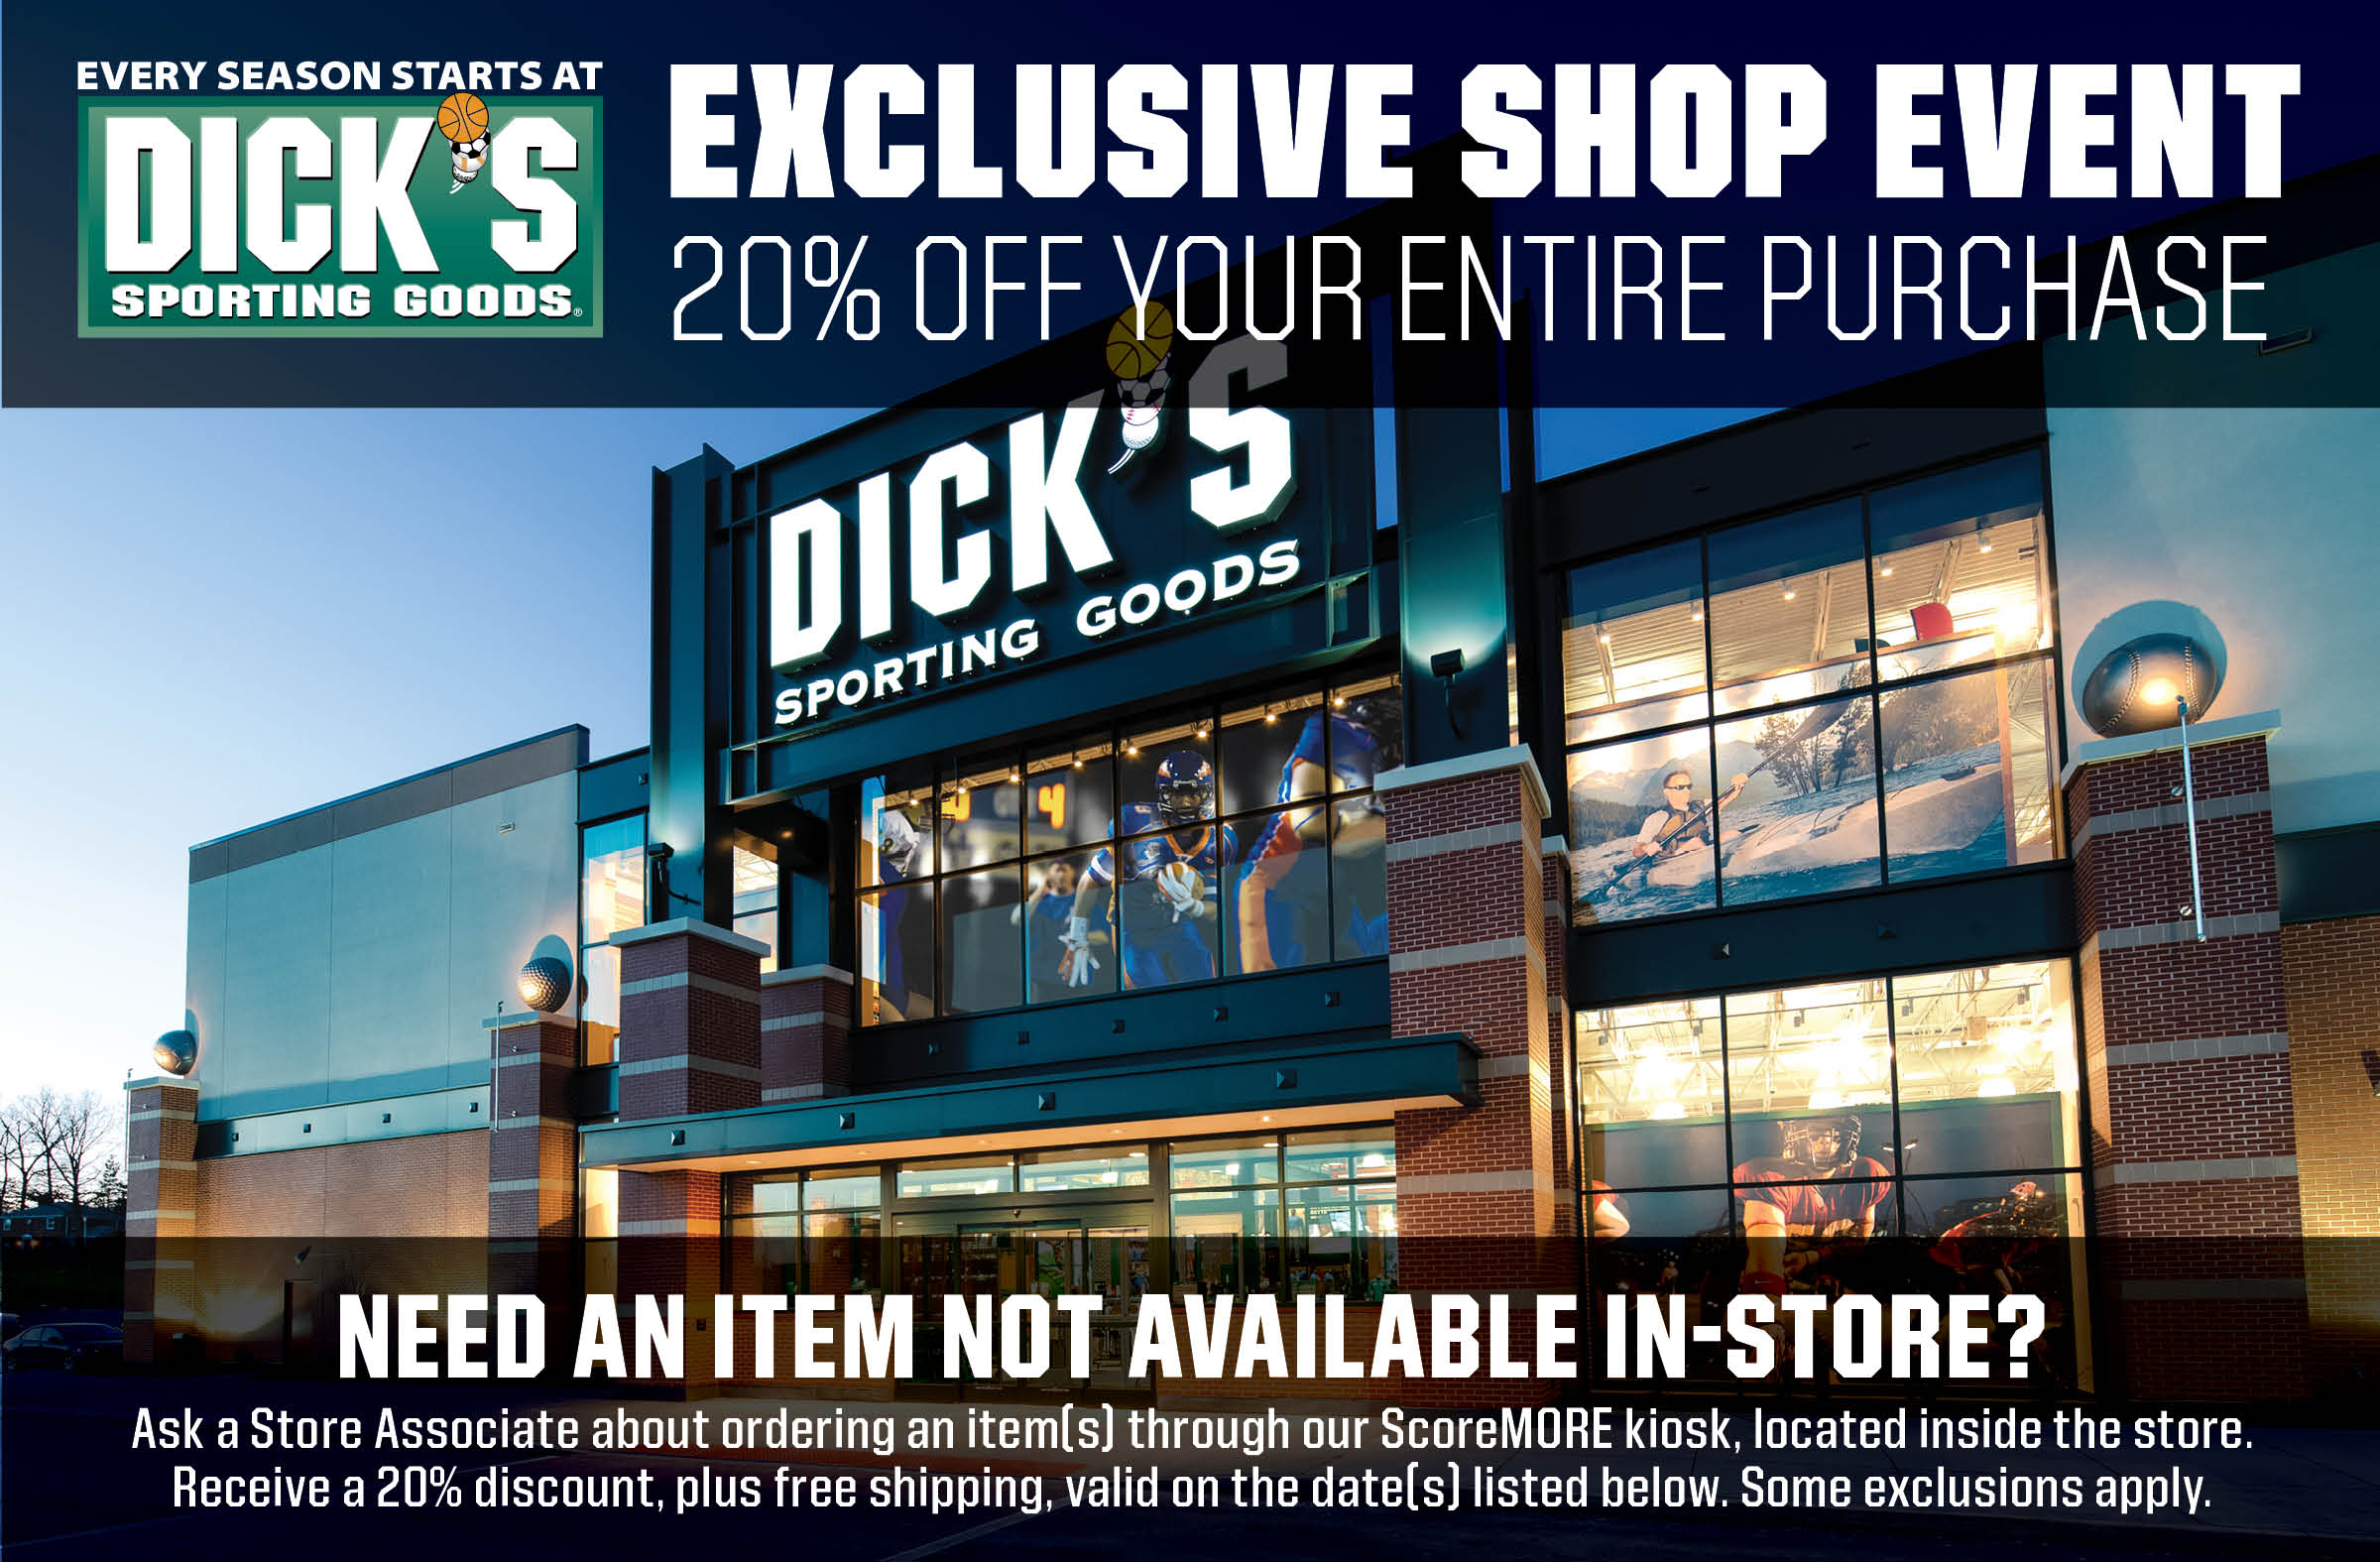 20% Off Shop Event at DICK'S Sporting Goods